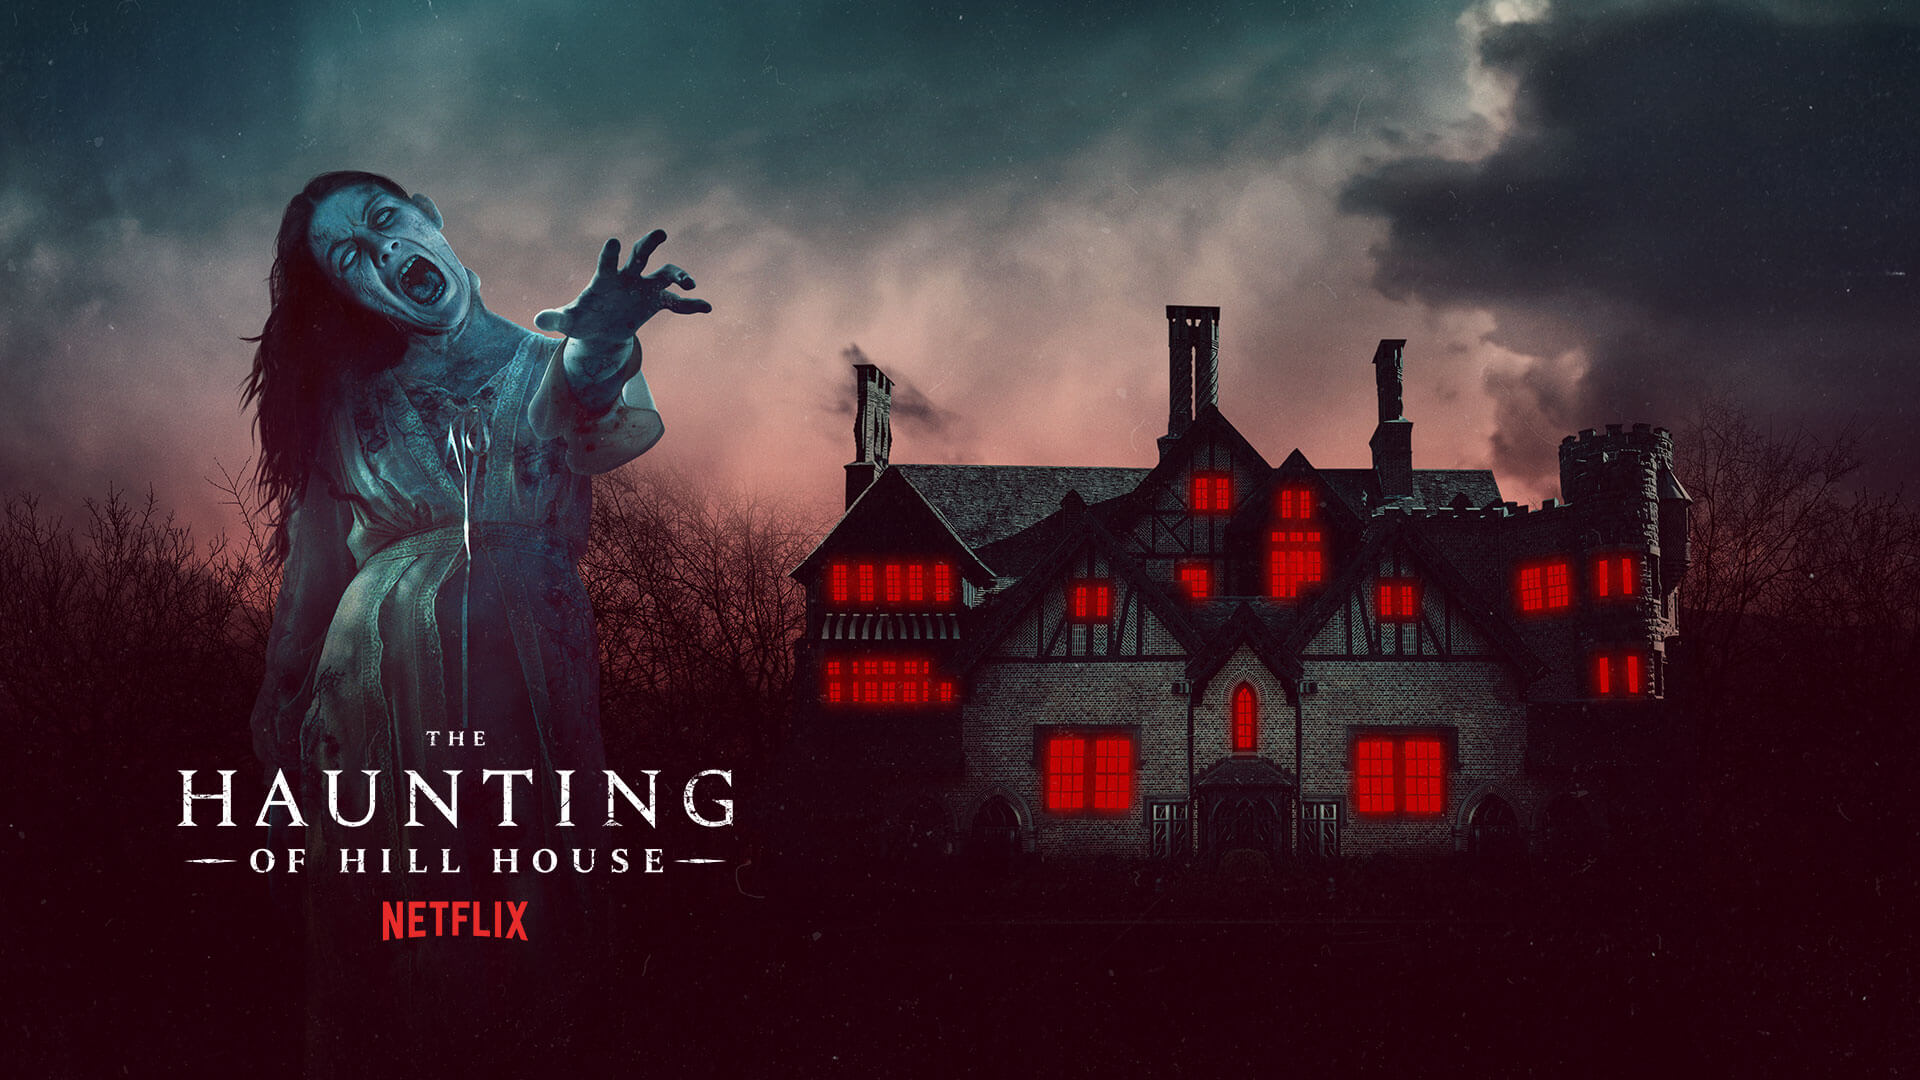 The haunting of hill house